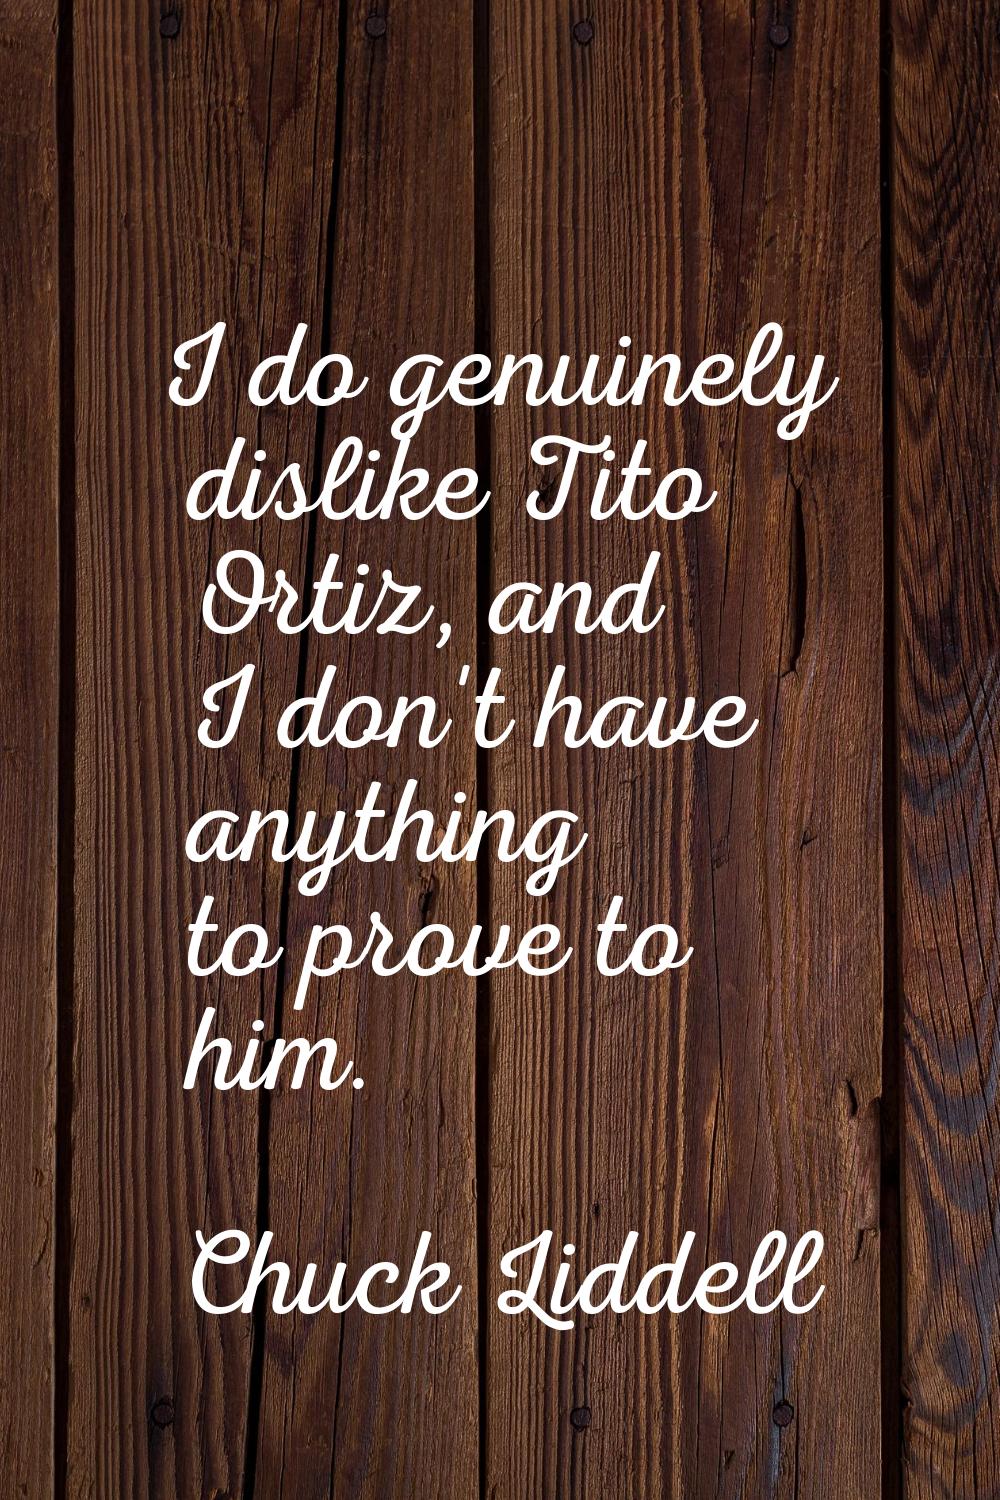 I do genuinely dislike Tito Ortiz, and I don't have anything to prove to him.